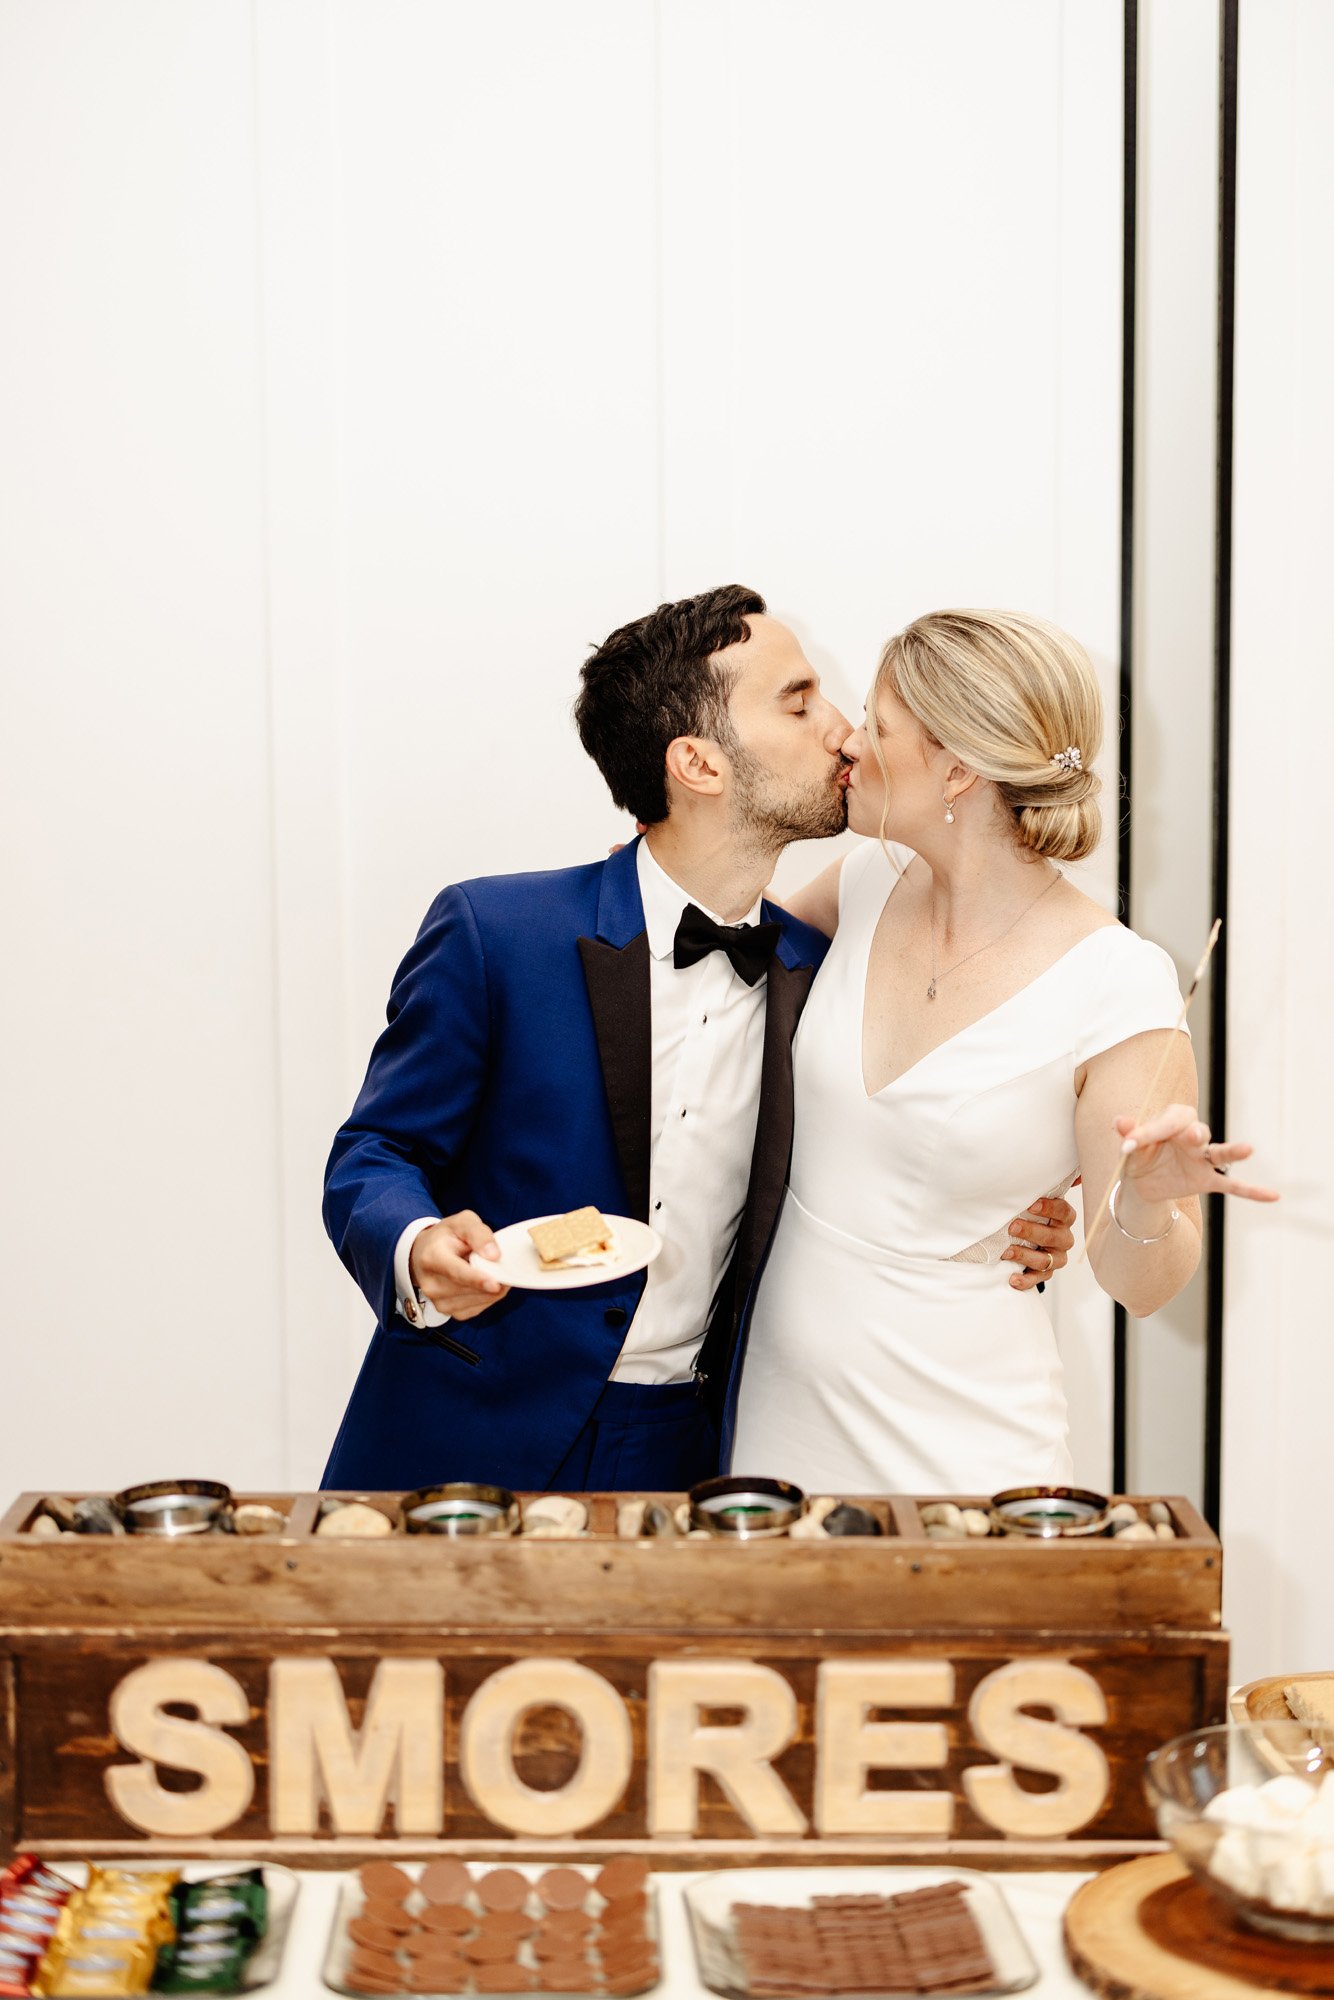 a smores bar during the reception at this clean and crisp wedding featuring a anais anette wedding dress and the groom wearing a blue suit